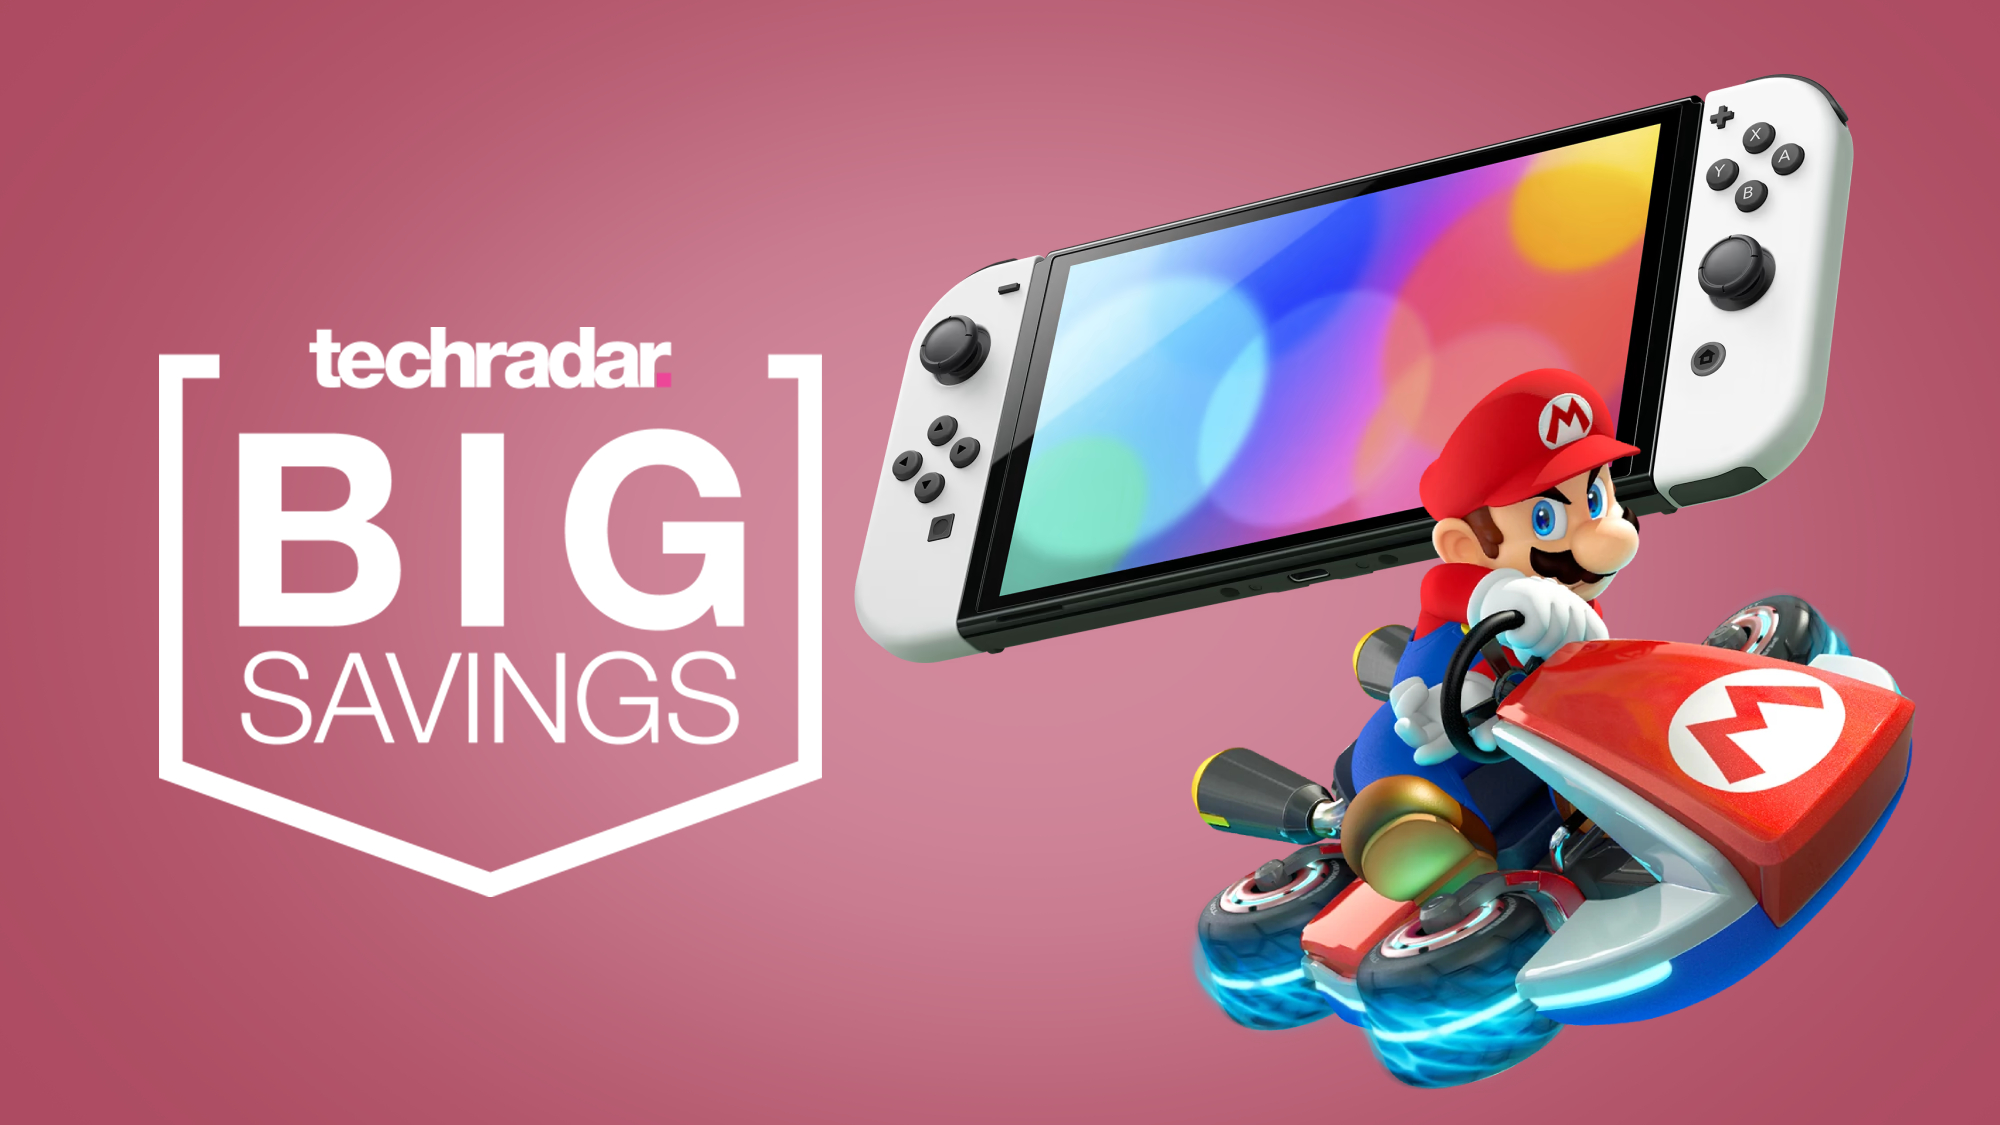 Nintendo Switch OLED customers can get £50  voucher in amazing deal, Gaming, Entertainment